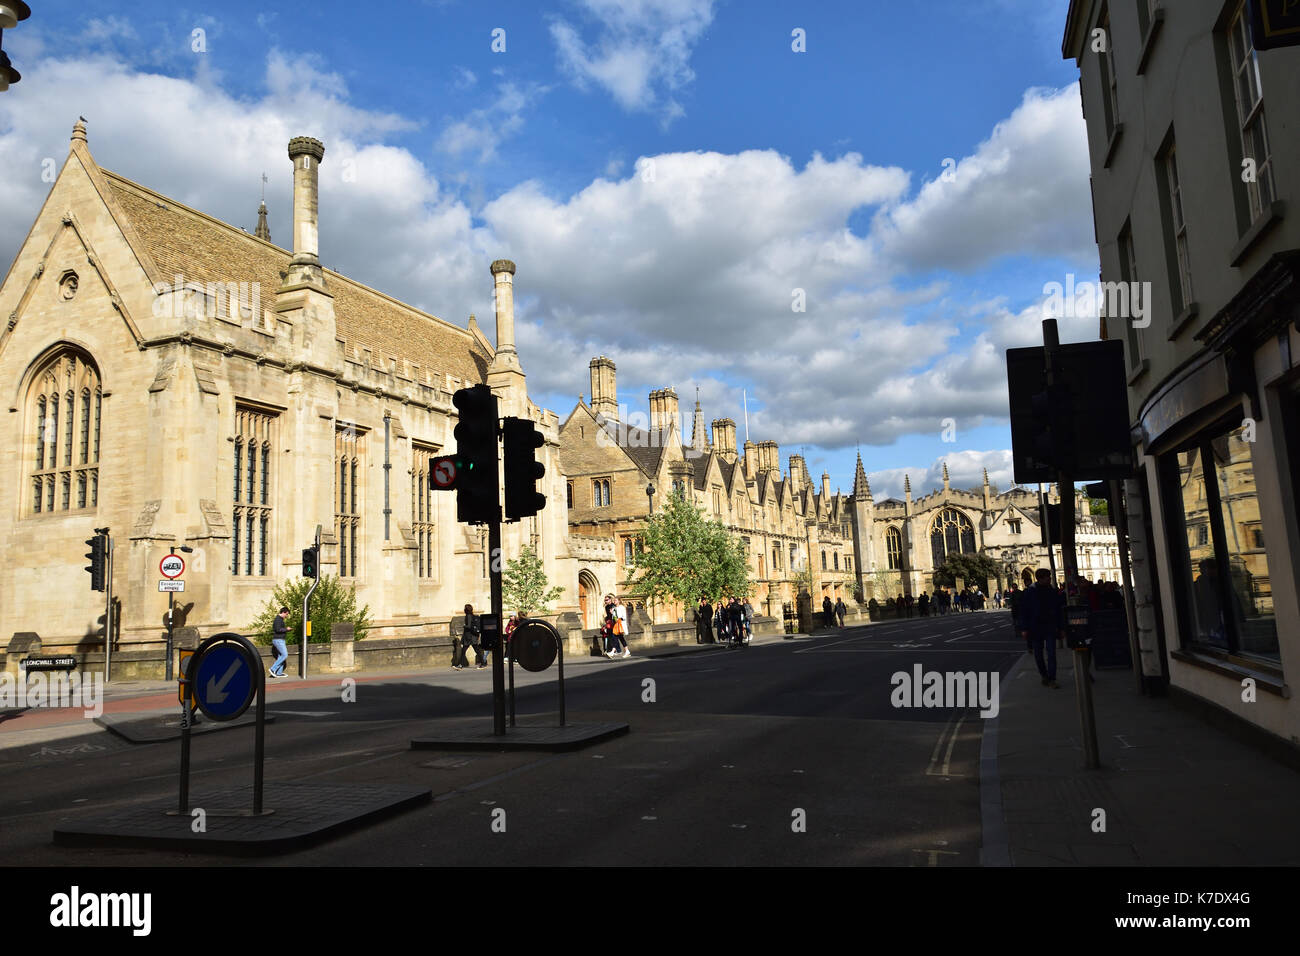 Stunning building architecture in the city of Oxford, in the Cotswolds, England. Stock Photo